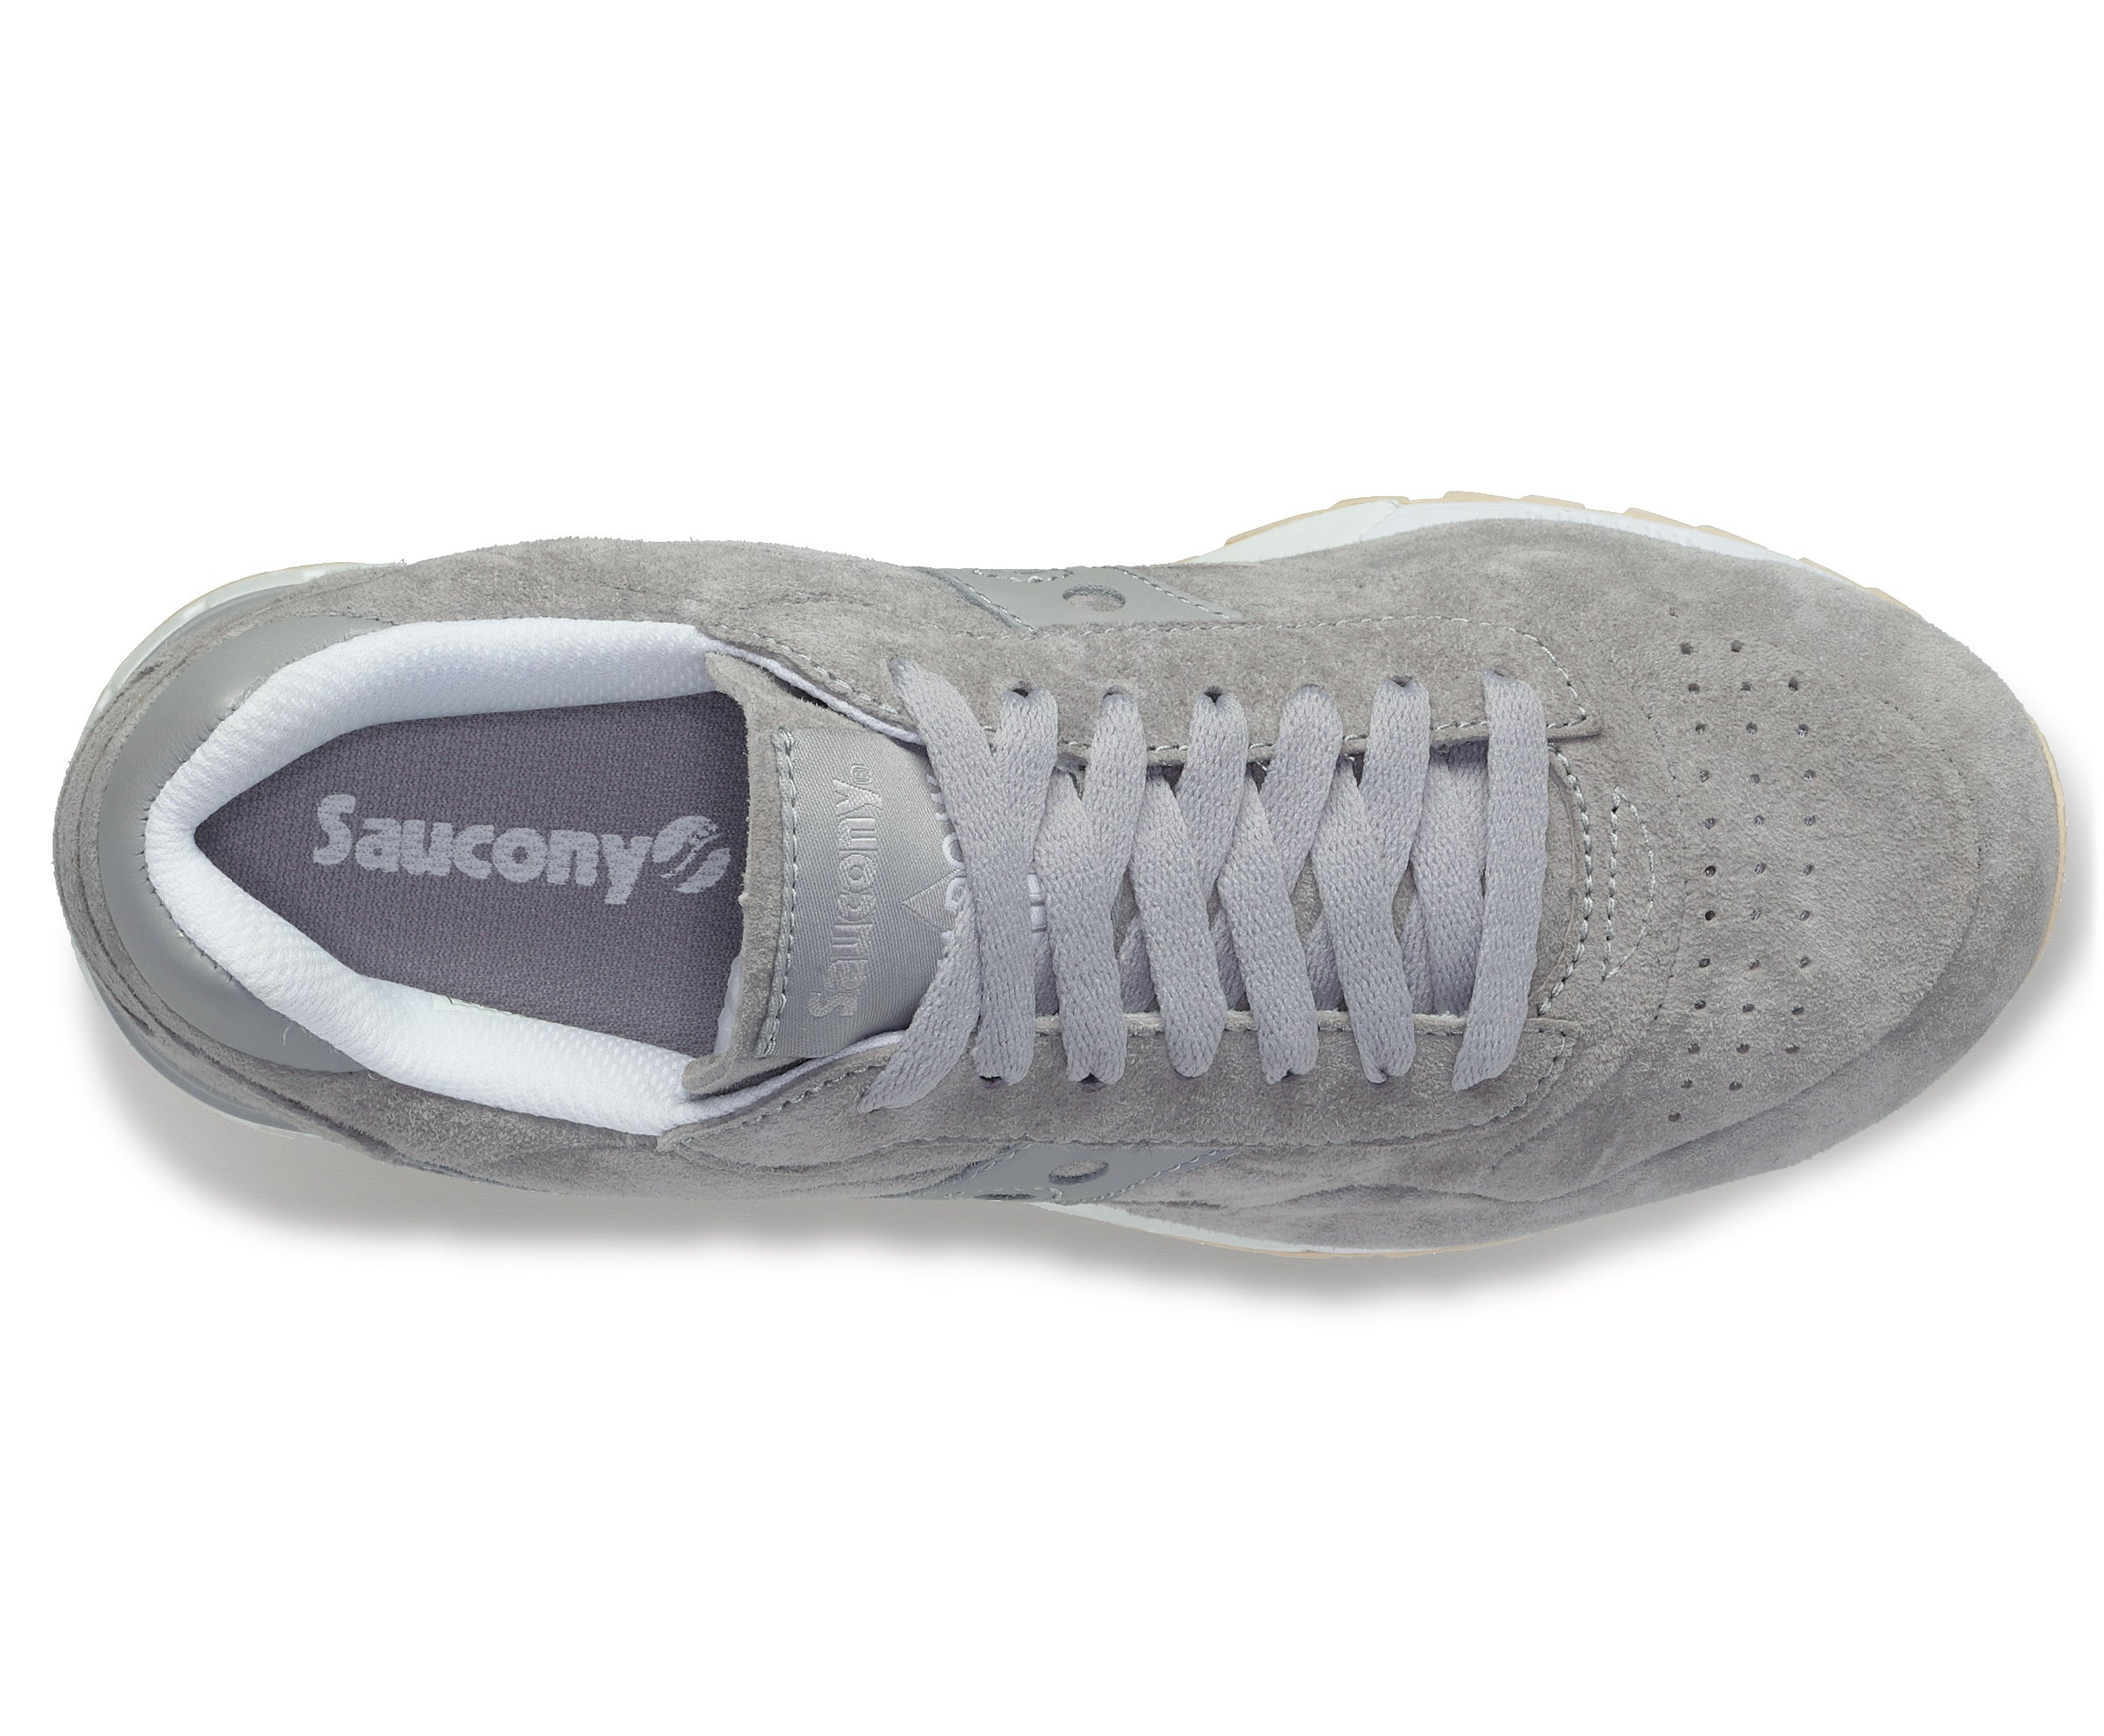 Top view of the Saucony 5000 Unisex lifestyle shoe in Grey